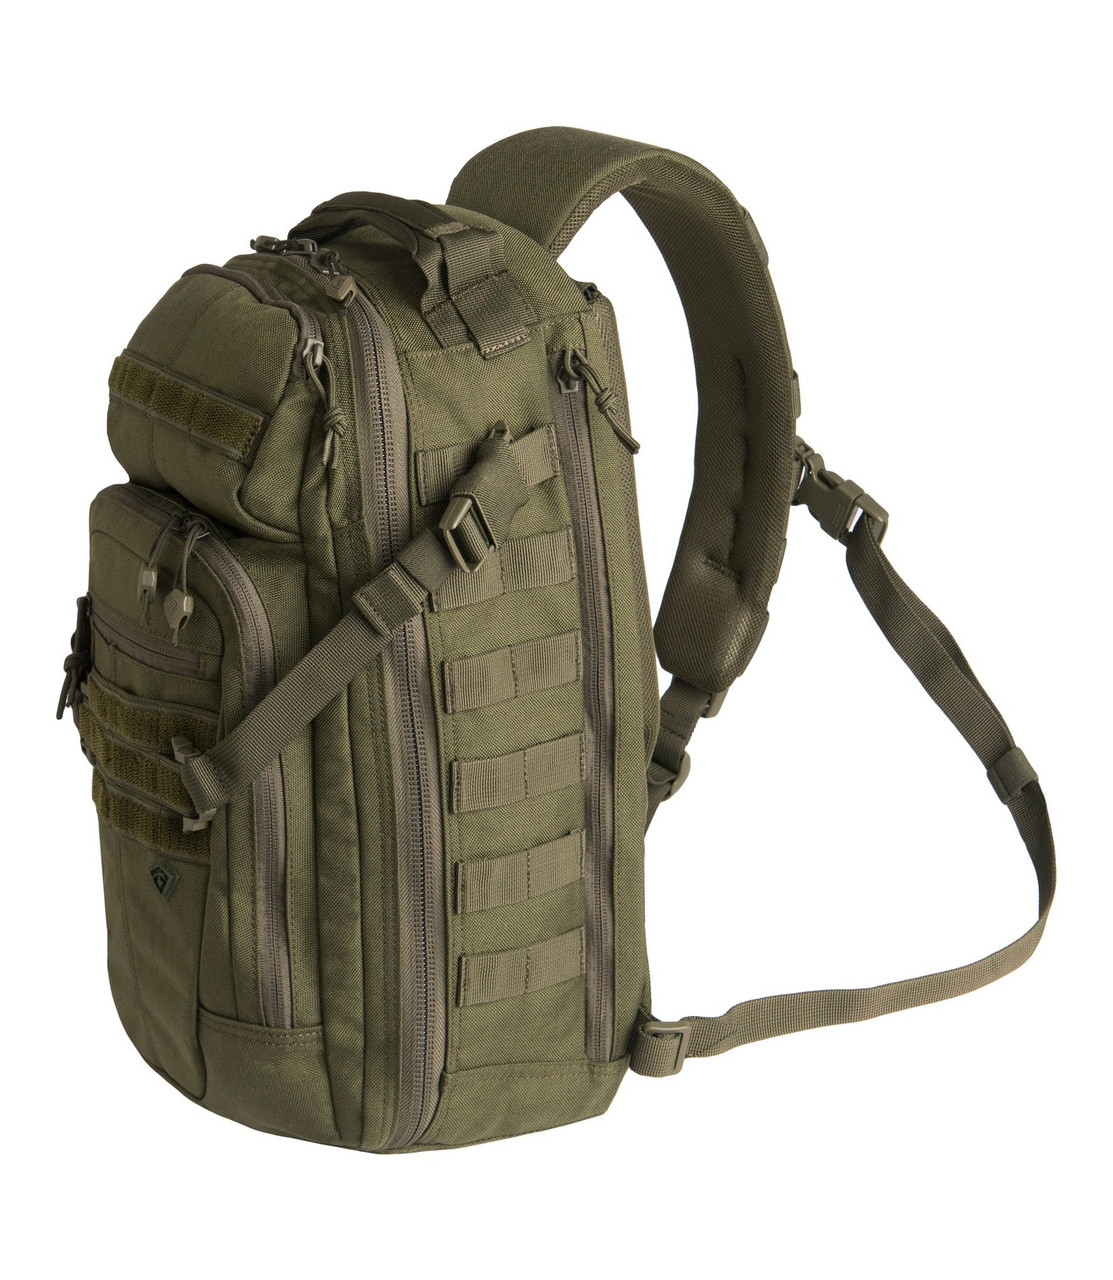 CROSSHATCH SLING PACK 19L - Select Shooting Supplies Inc.